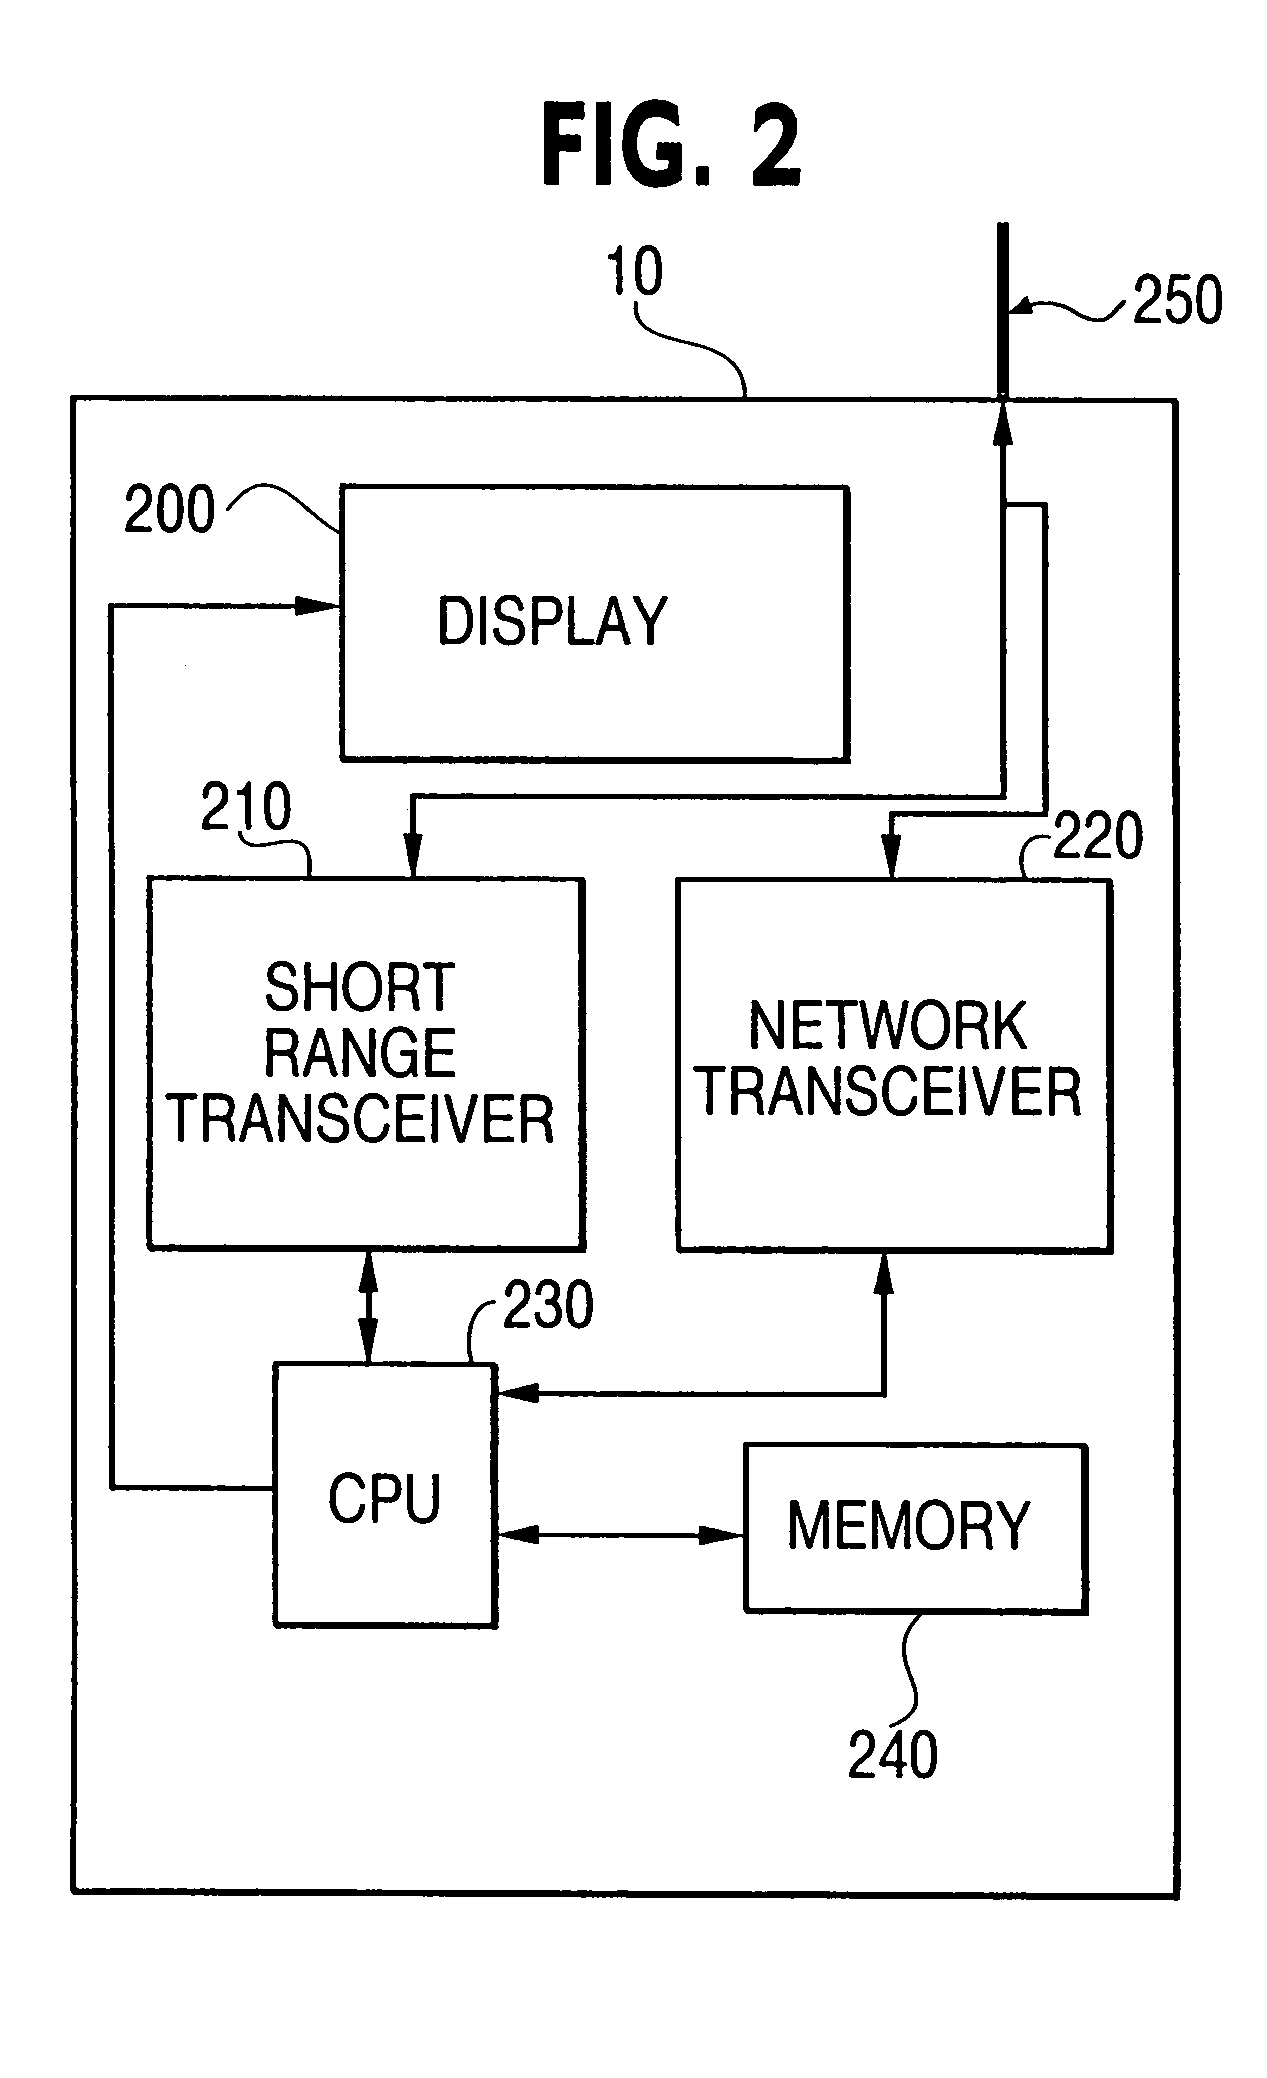 System and method for the transfer of digital data to a mobile device